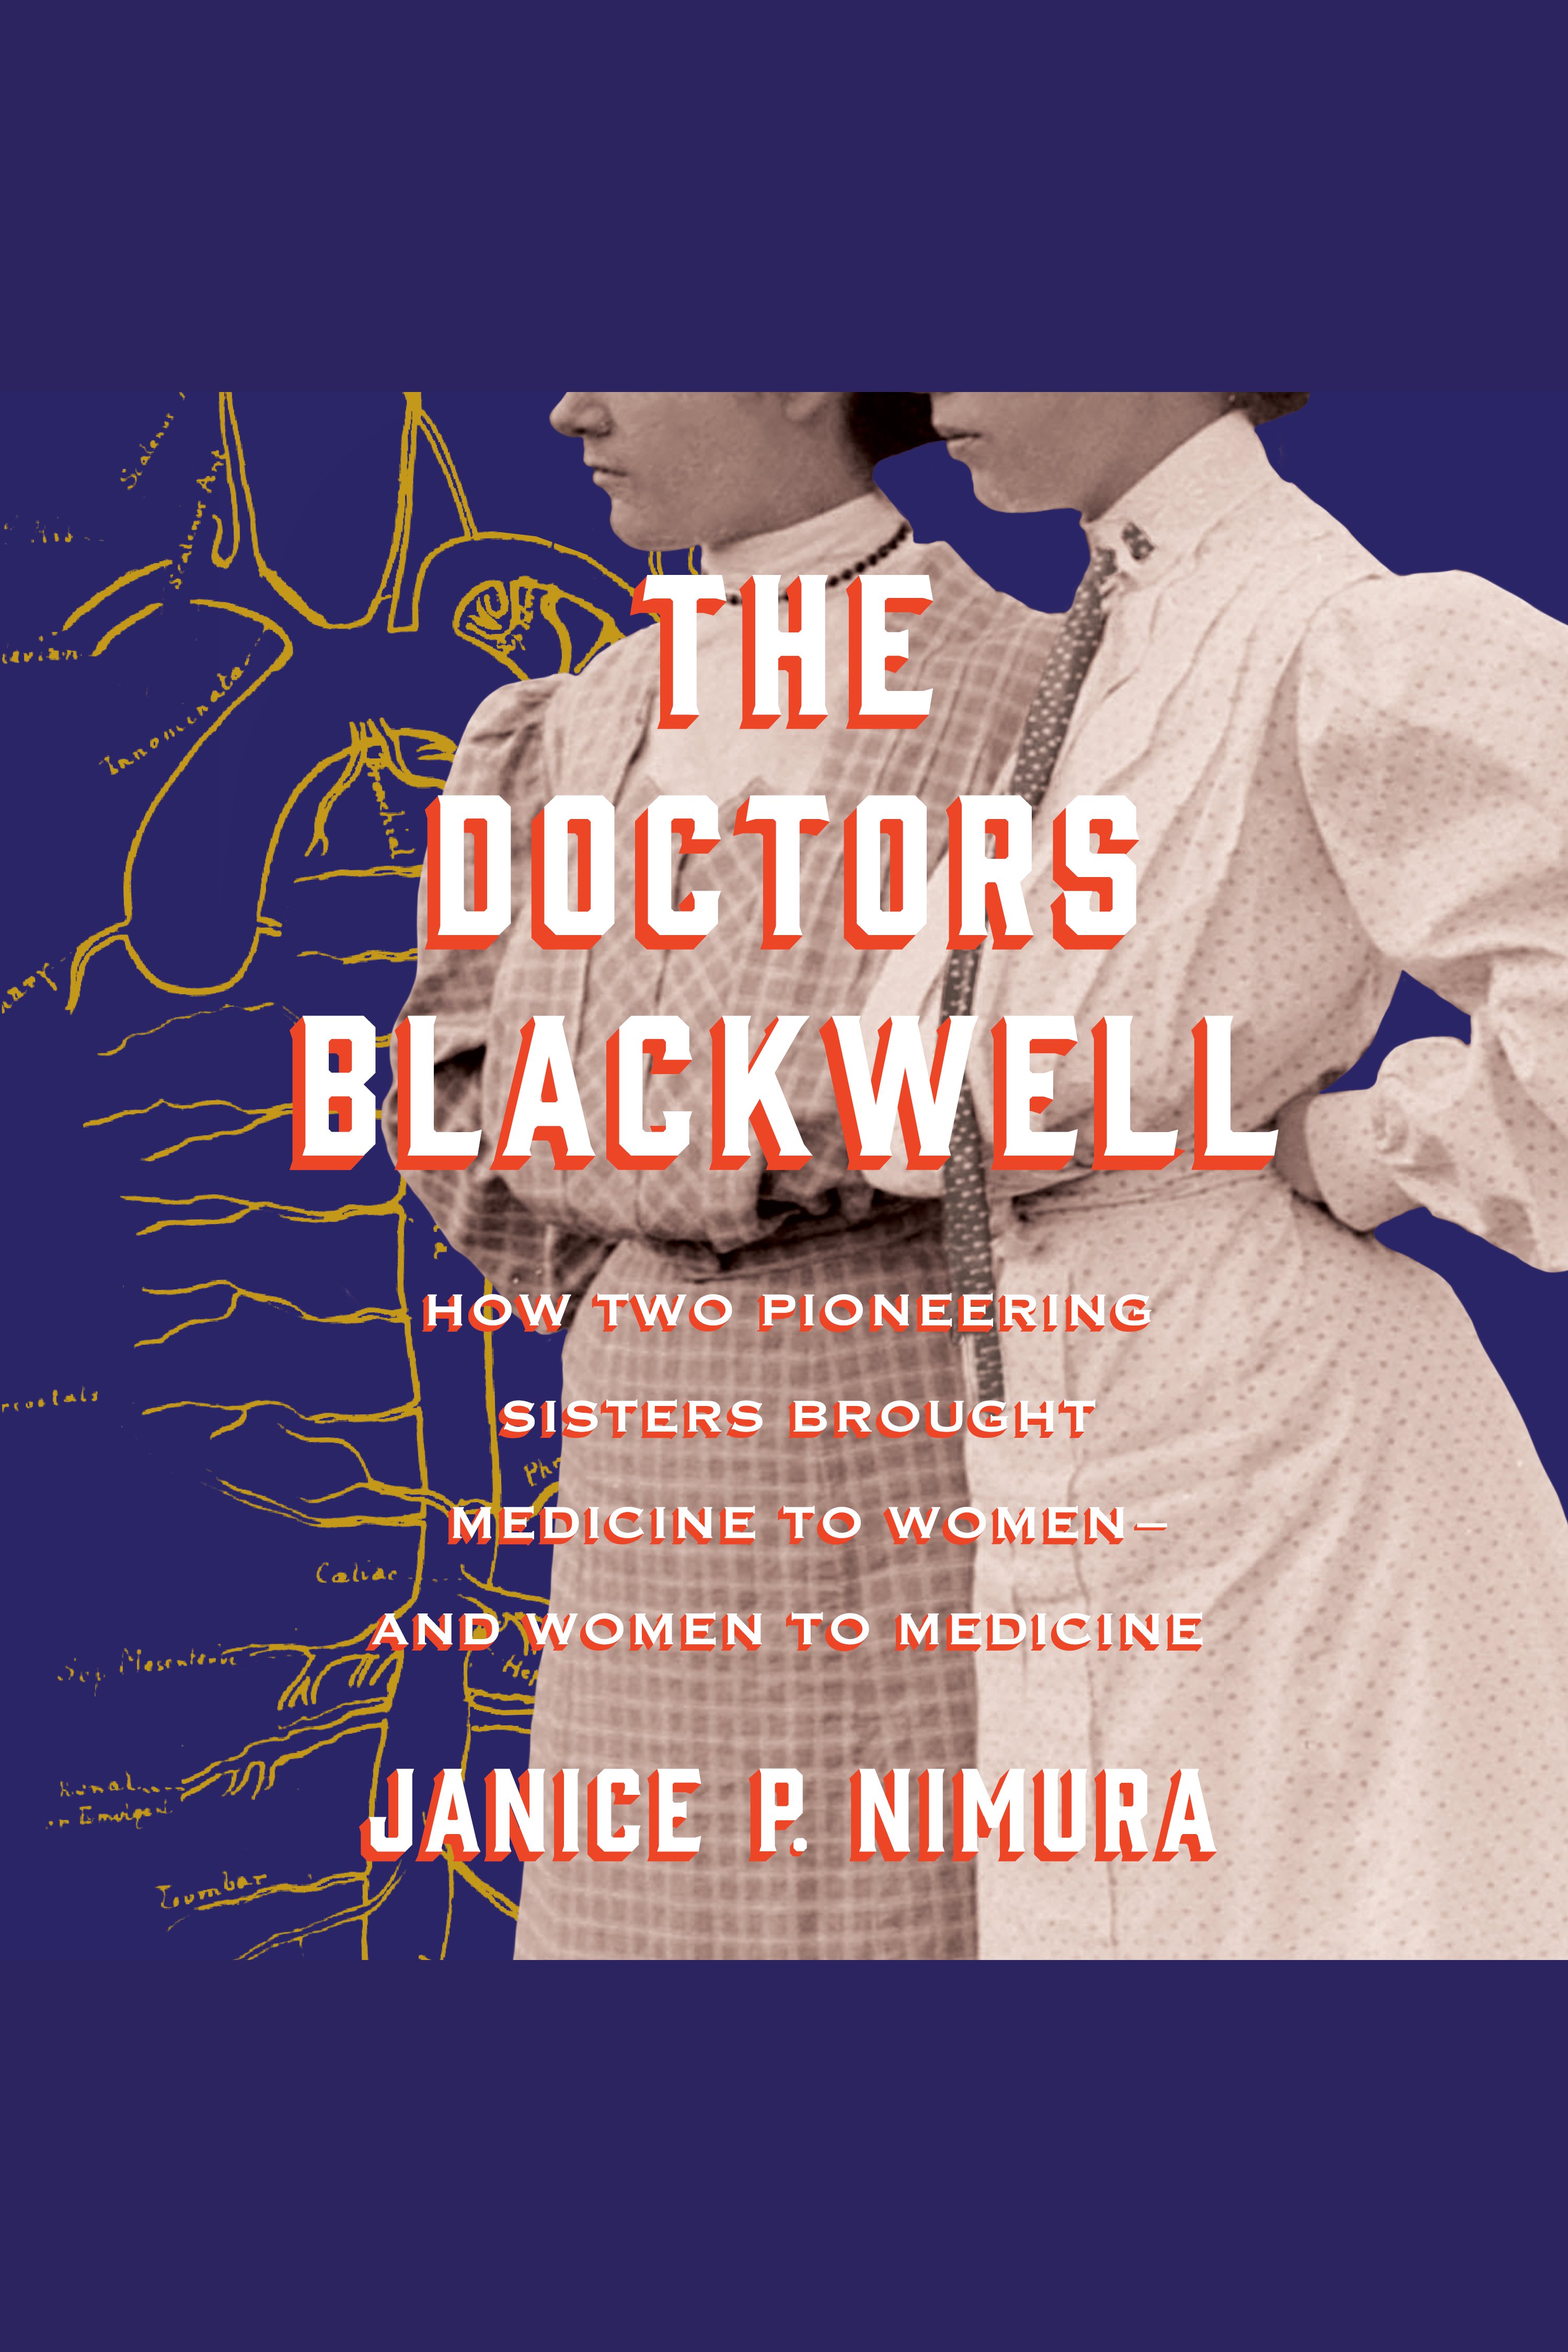 Image de couverture de The Doctors Blackwell [electronic resource] : How Two Pioneering Sisters Brought Medicine to Women and Women to Medicine